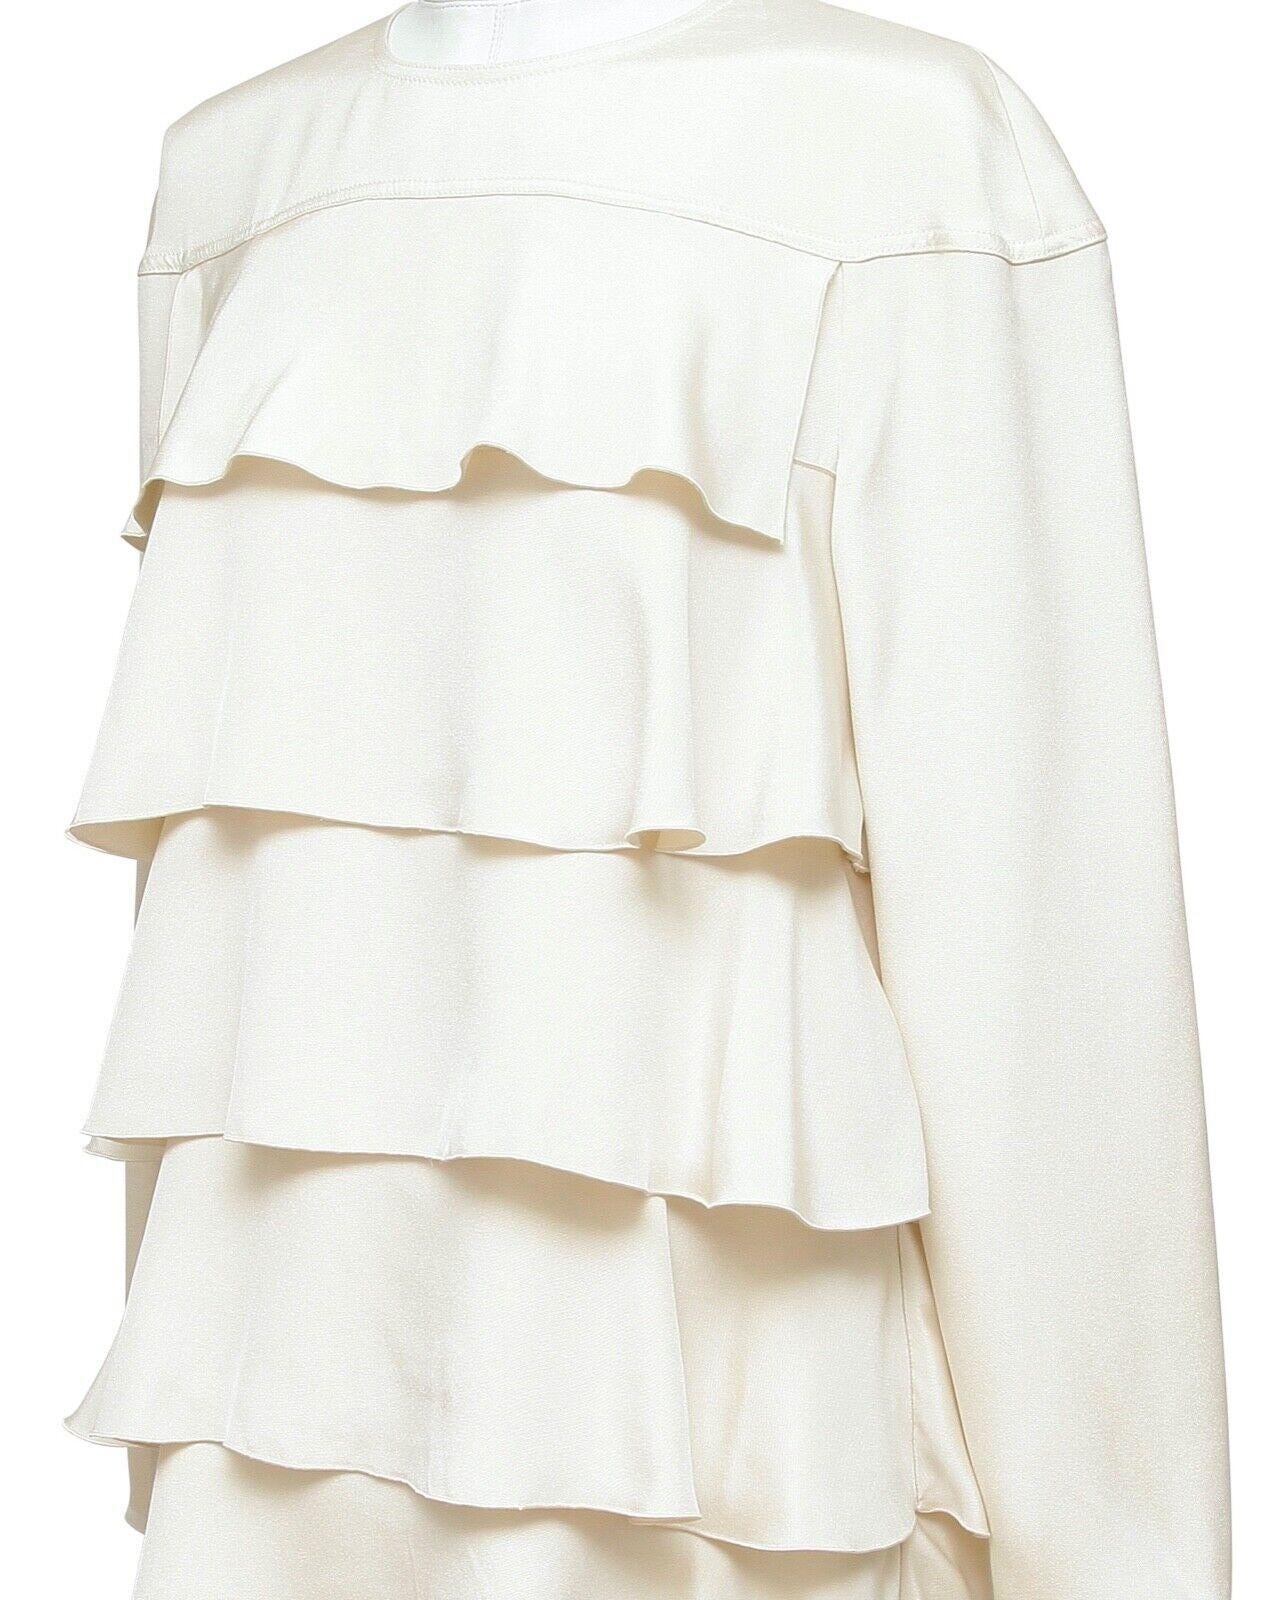 VALENTINO Ivory Dress Long Sleeve Knee Length Silk Tiered Crew Neck Sz 6 For Sale 2